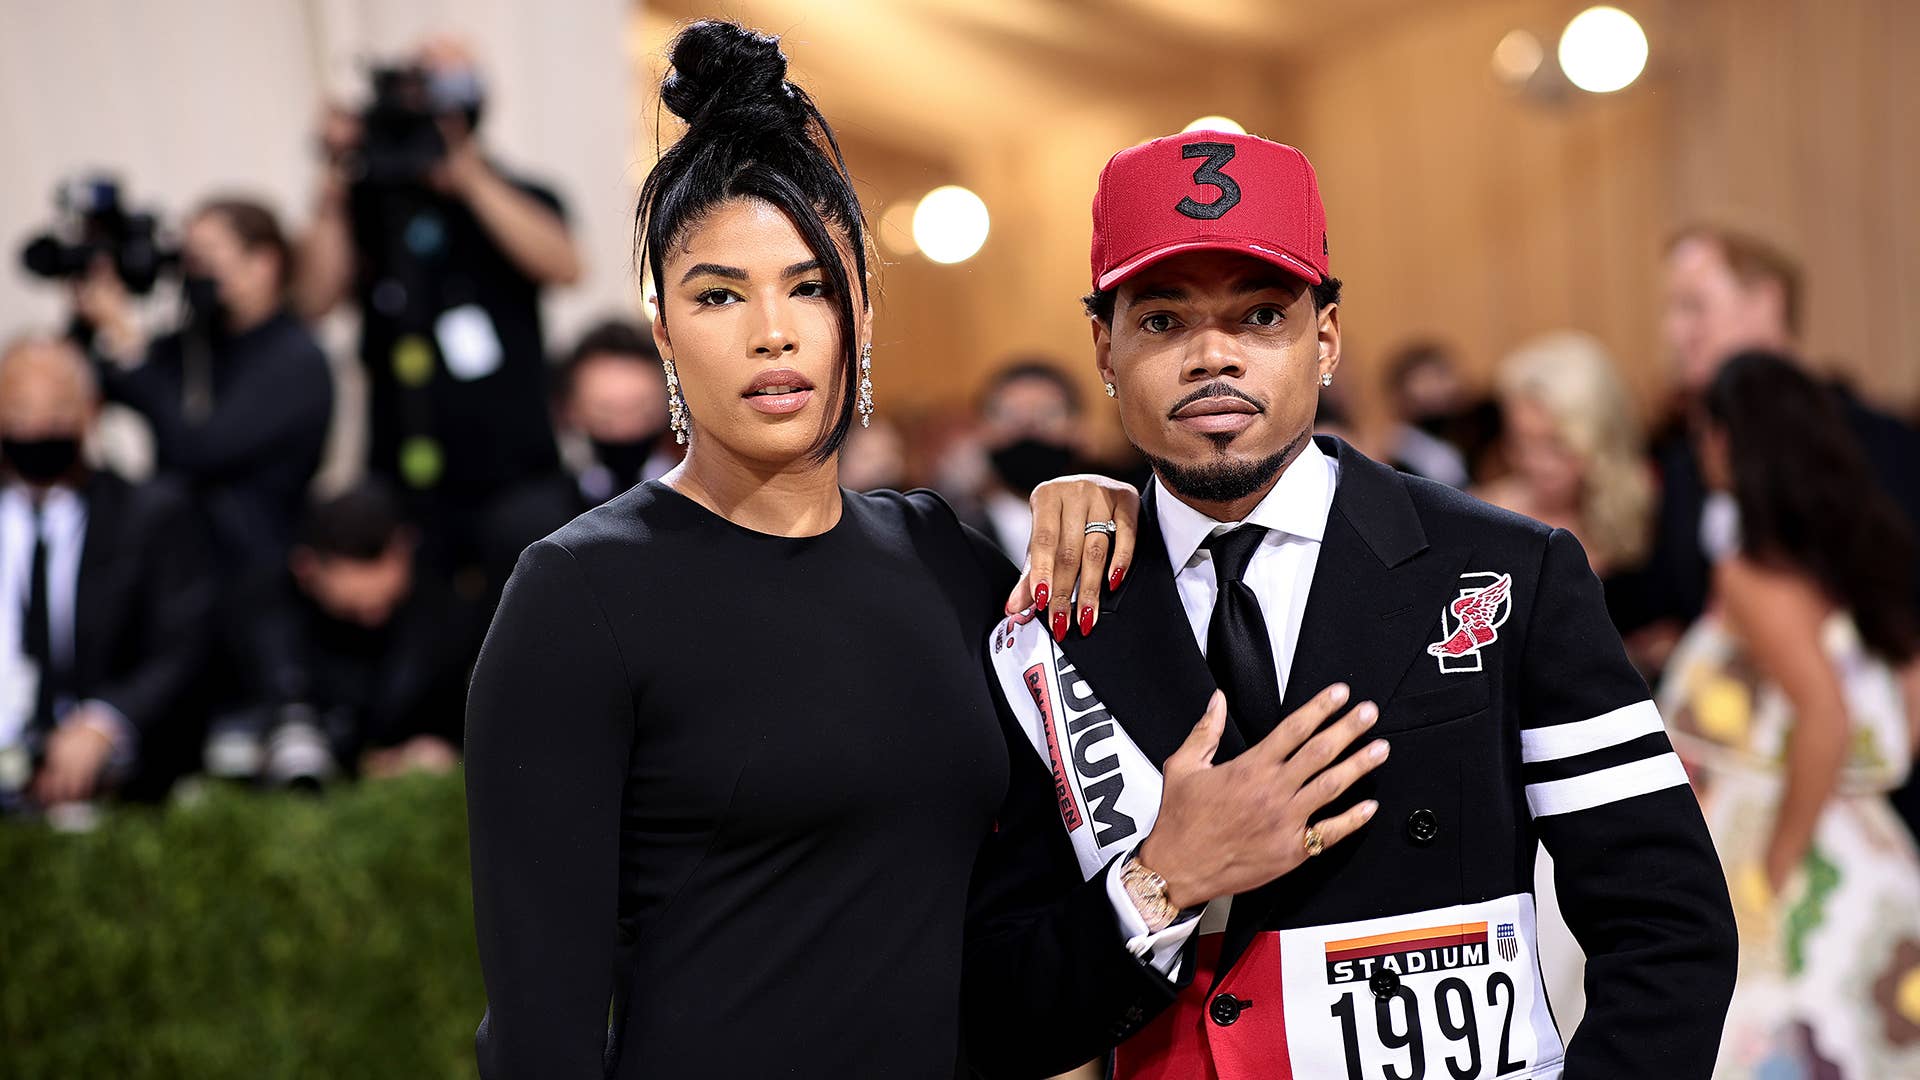 Kirsten Corley and Chance the Rapper attend The 2021 Met Gala